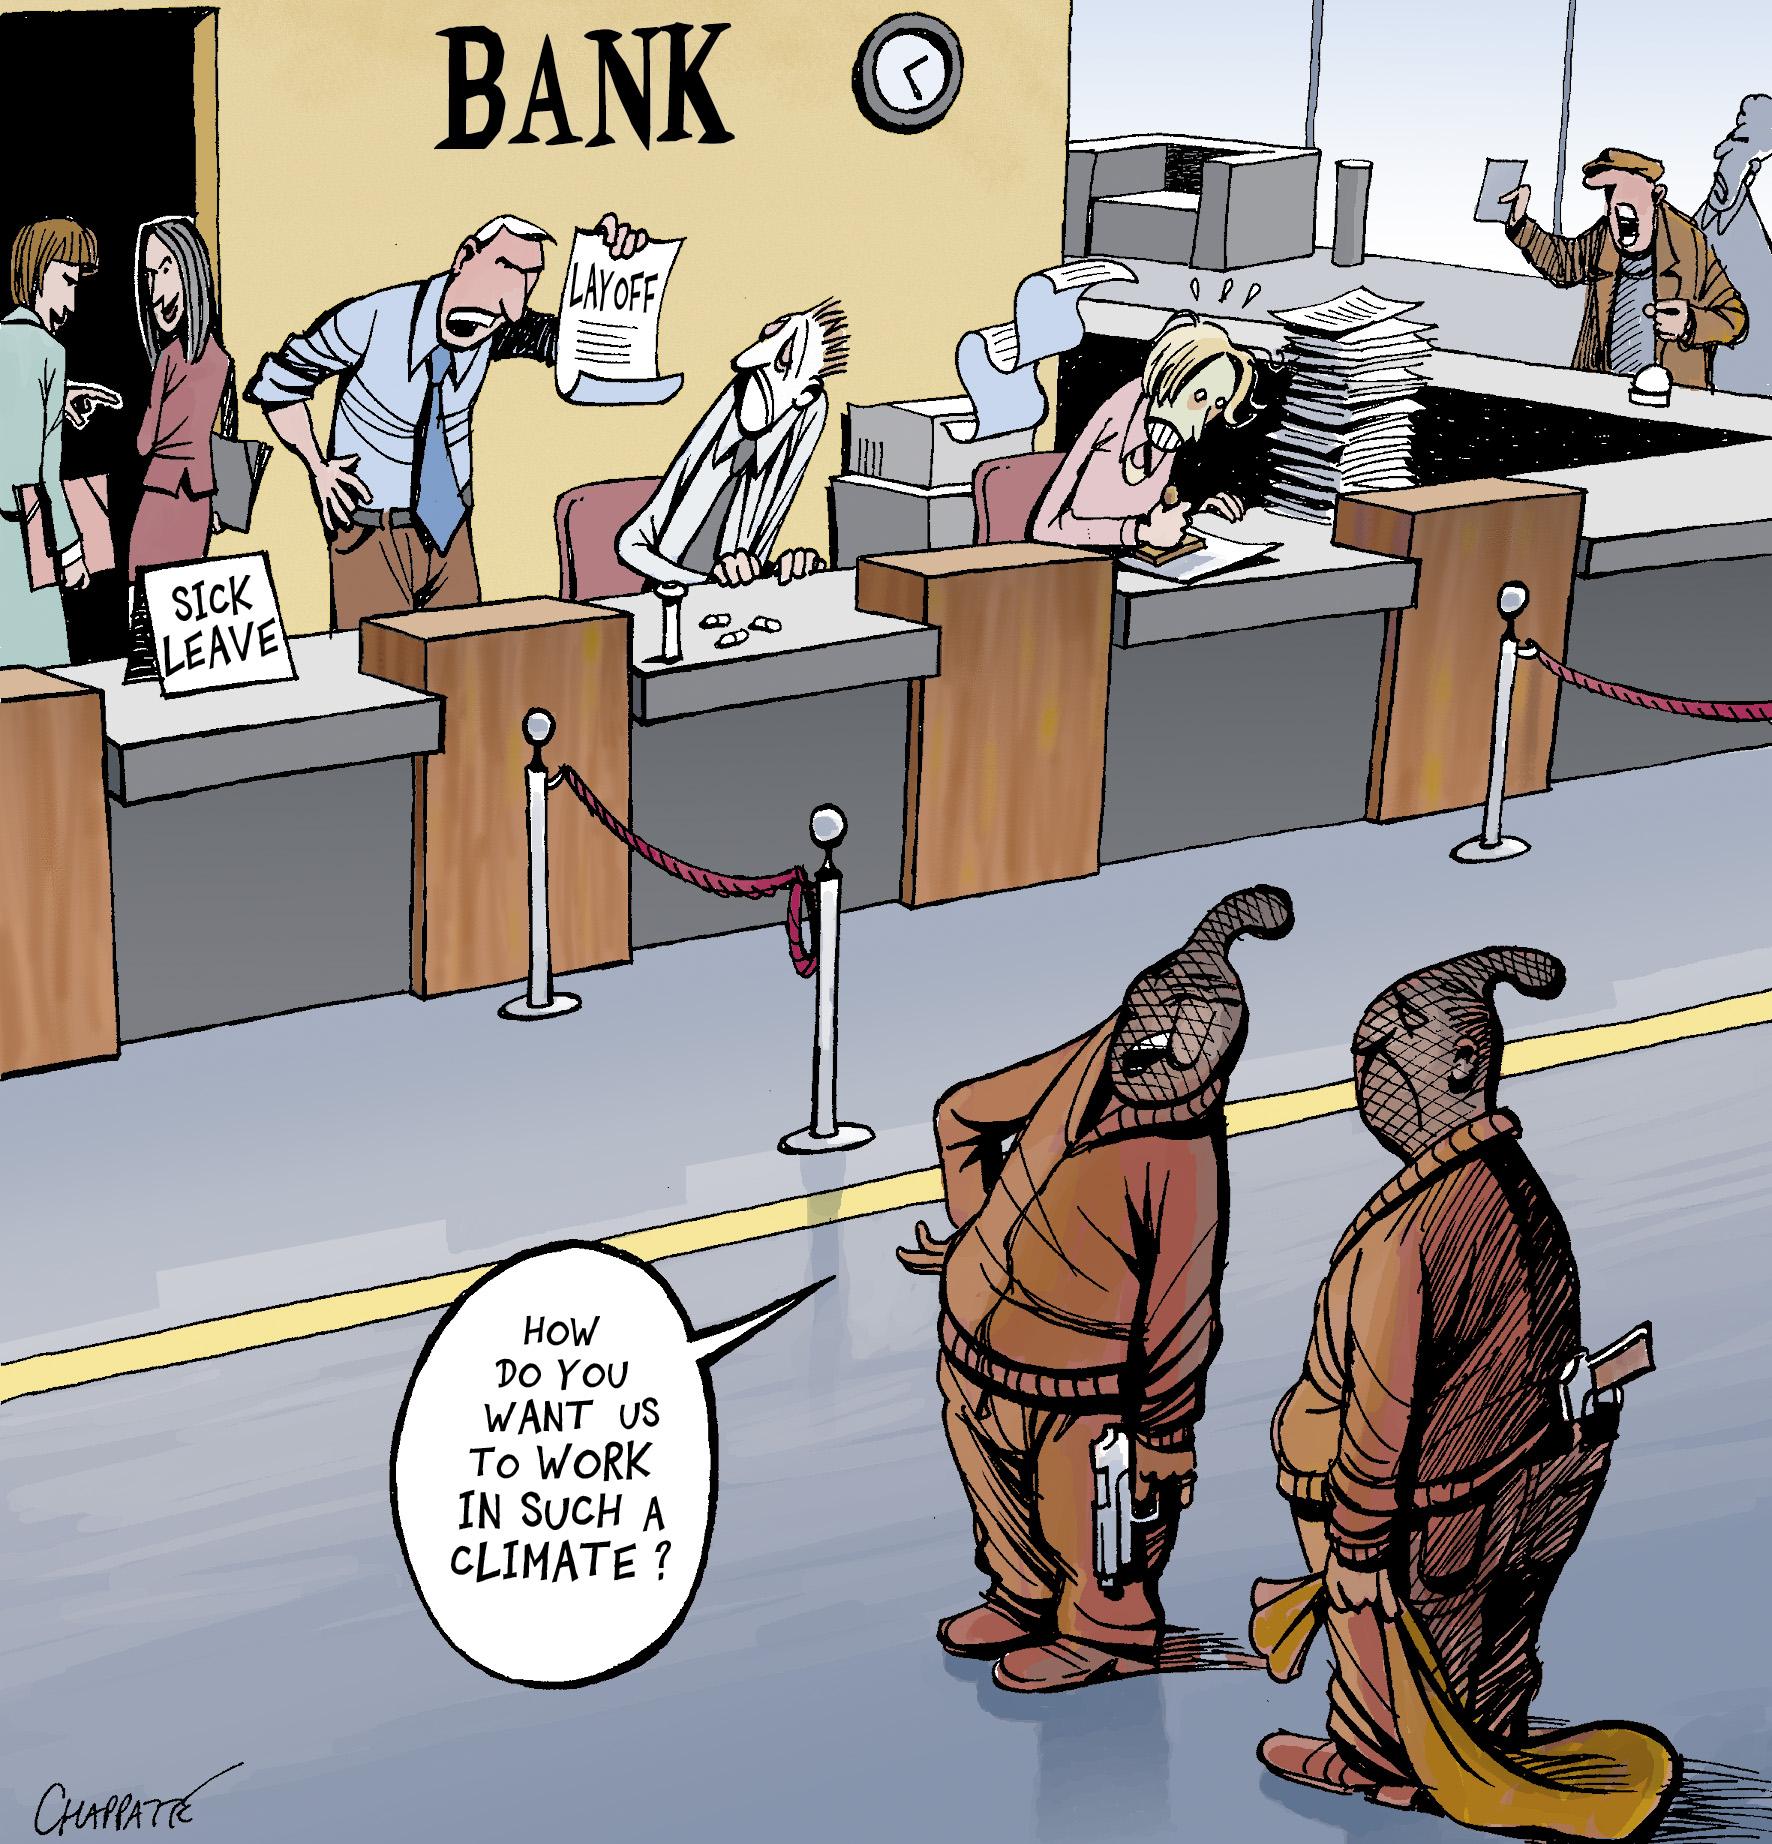 Banking Sector In Crisis